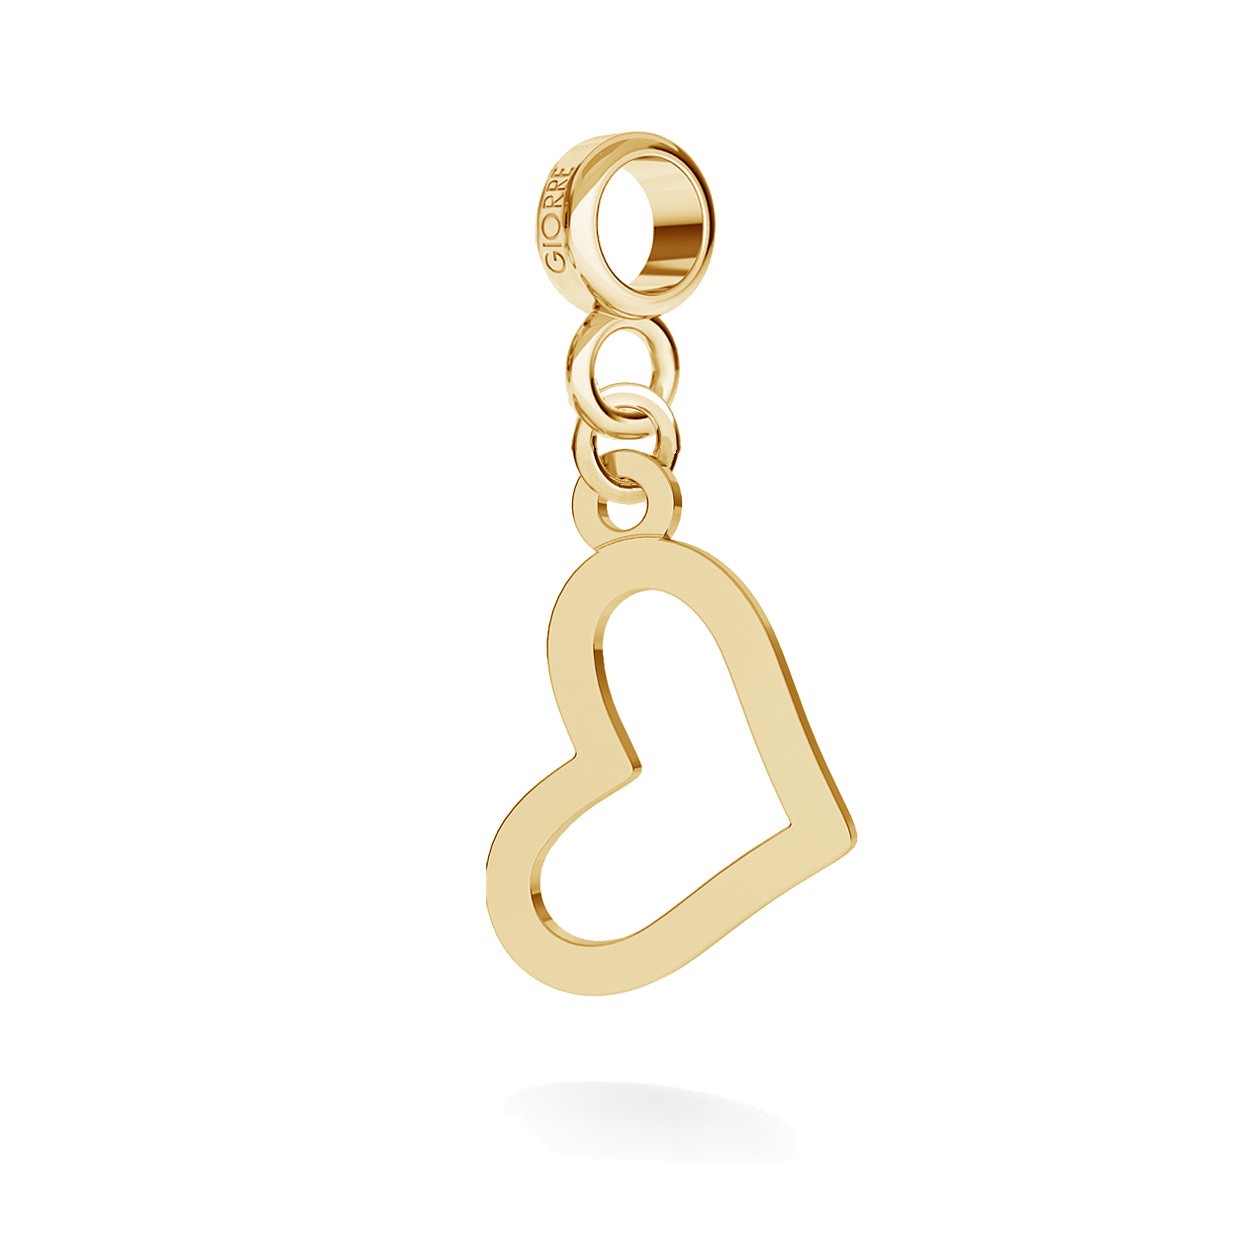 CHARM 114, SIMPLE HEART, STERLING SILVER (925) RHODIUM OR GOLD PLATED